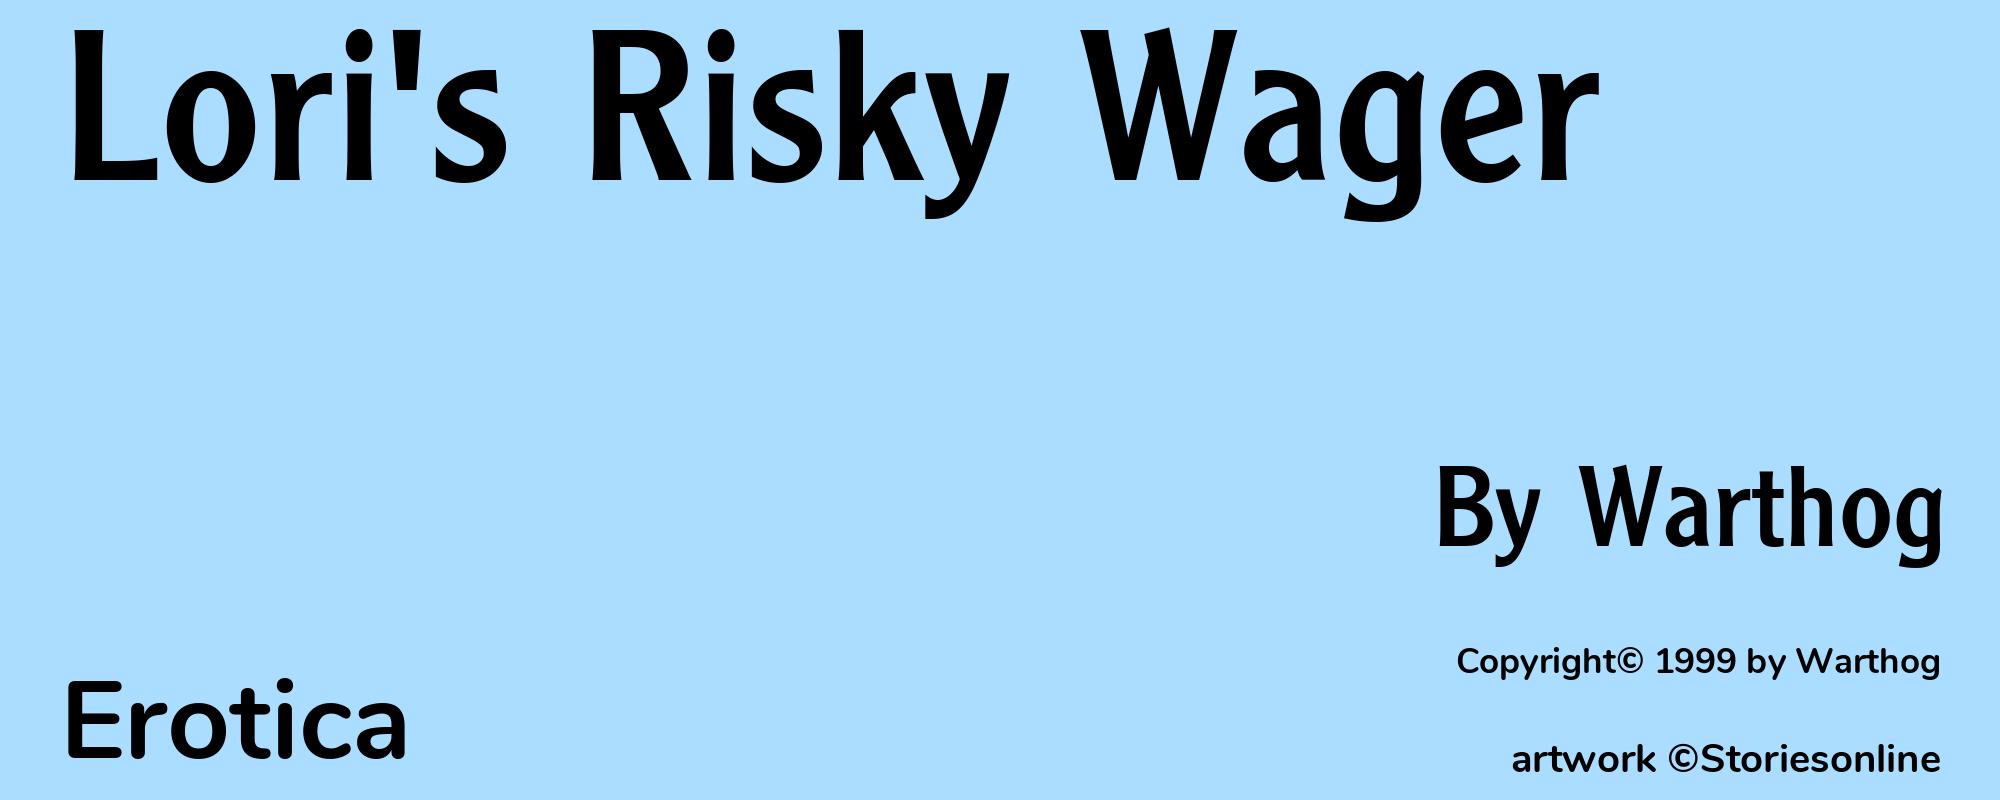 Lori's Risky Wager - Cover